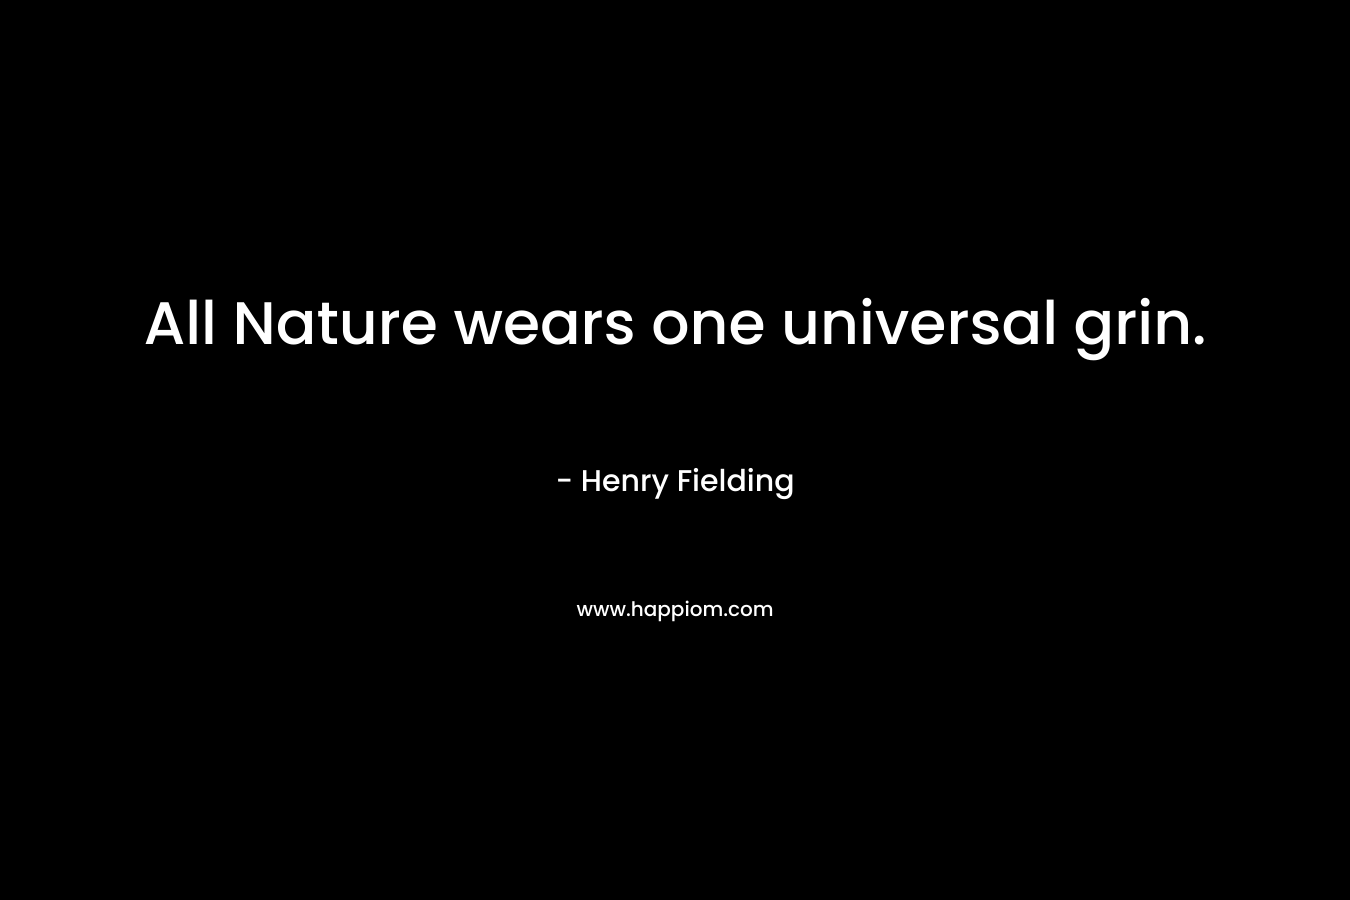 All Nature wears one universal grin.